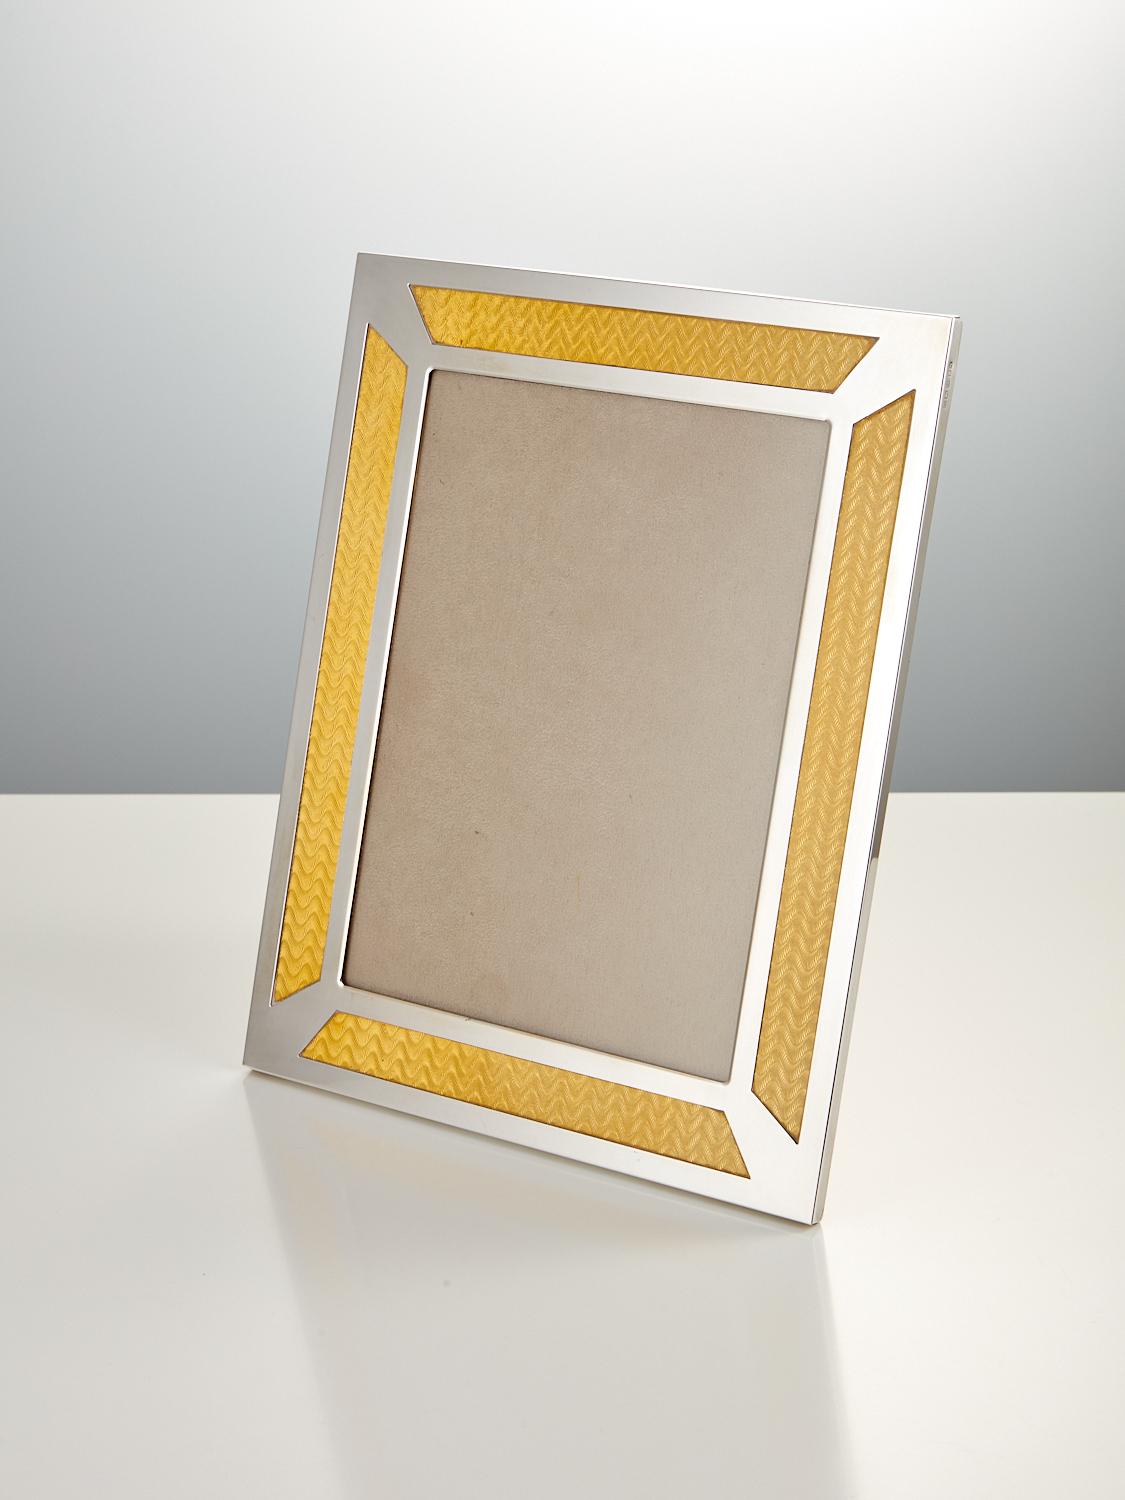 A Late 20th Century English Sterling Silver vintage photo Frame with foil enamel decoration, Date 1963-64, London.

This vintage silver frame is excellent quality with full hallmark & makers initials GK & CK Kitney & Co.
The foil enamel decoration